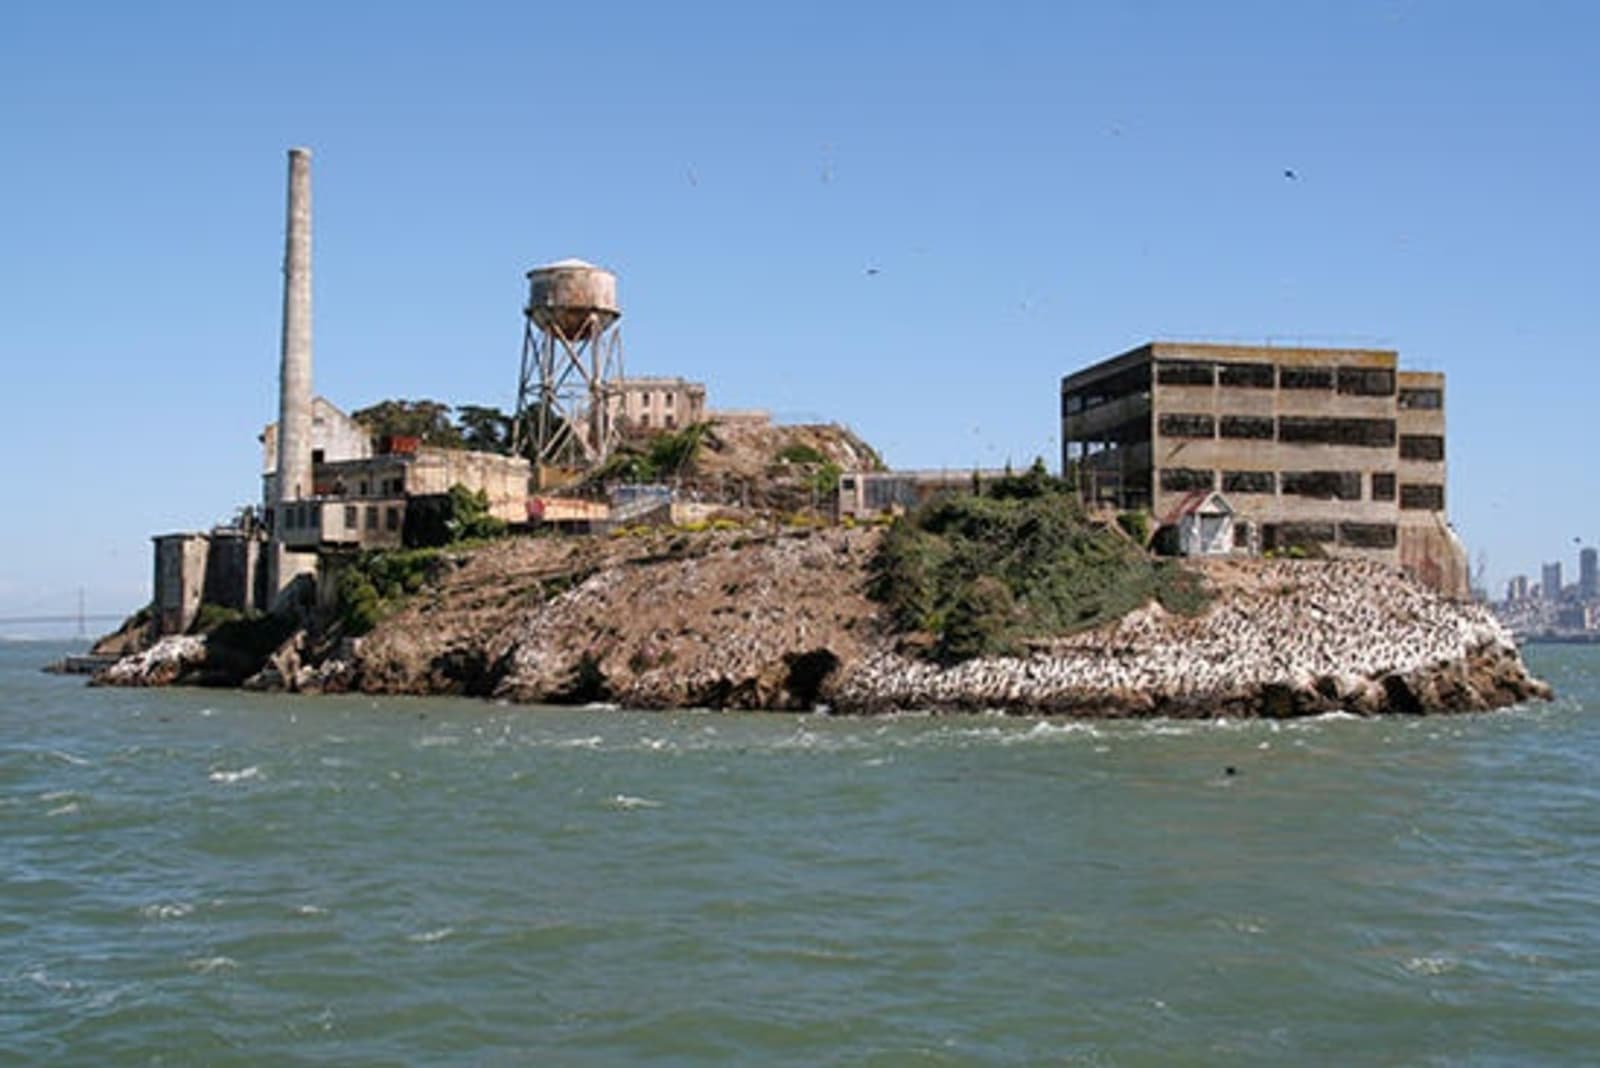 View of Alcatraz prison from the water.